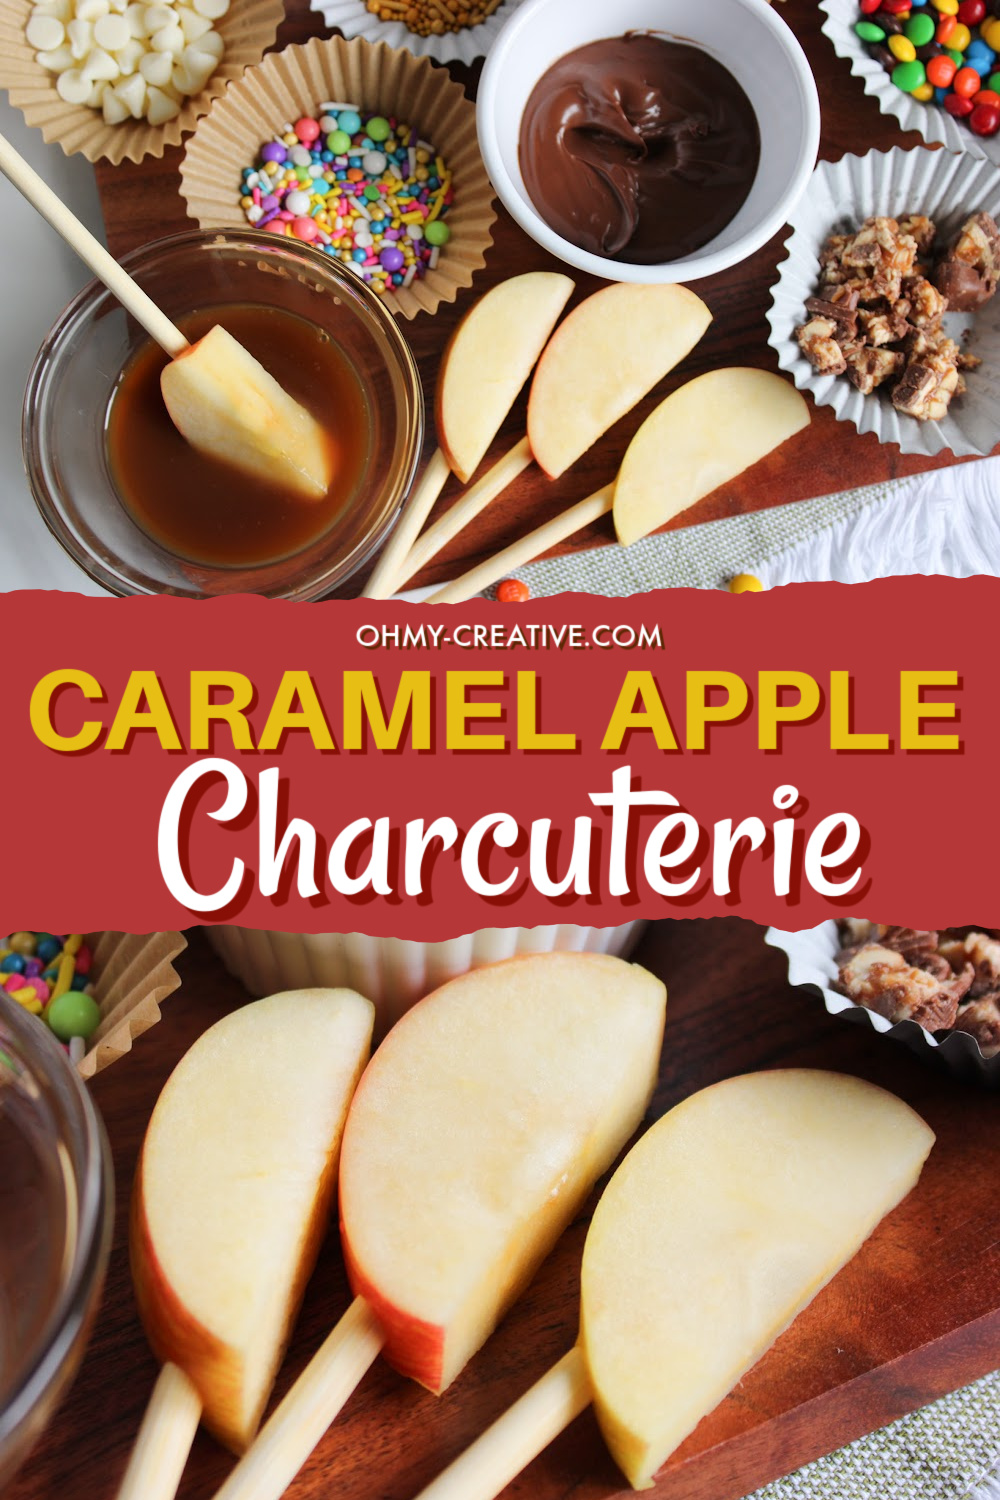 Caramel apple charcuterie board with dips and toppings